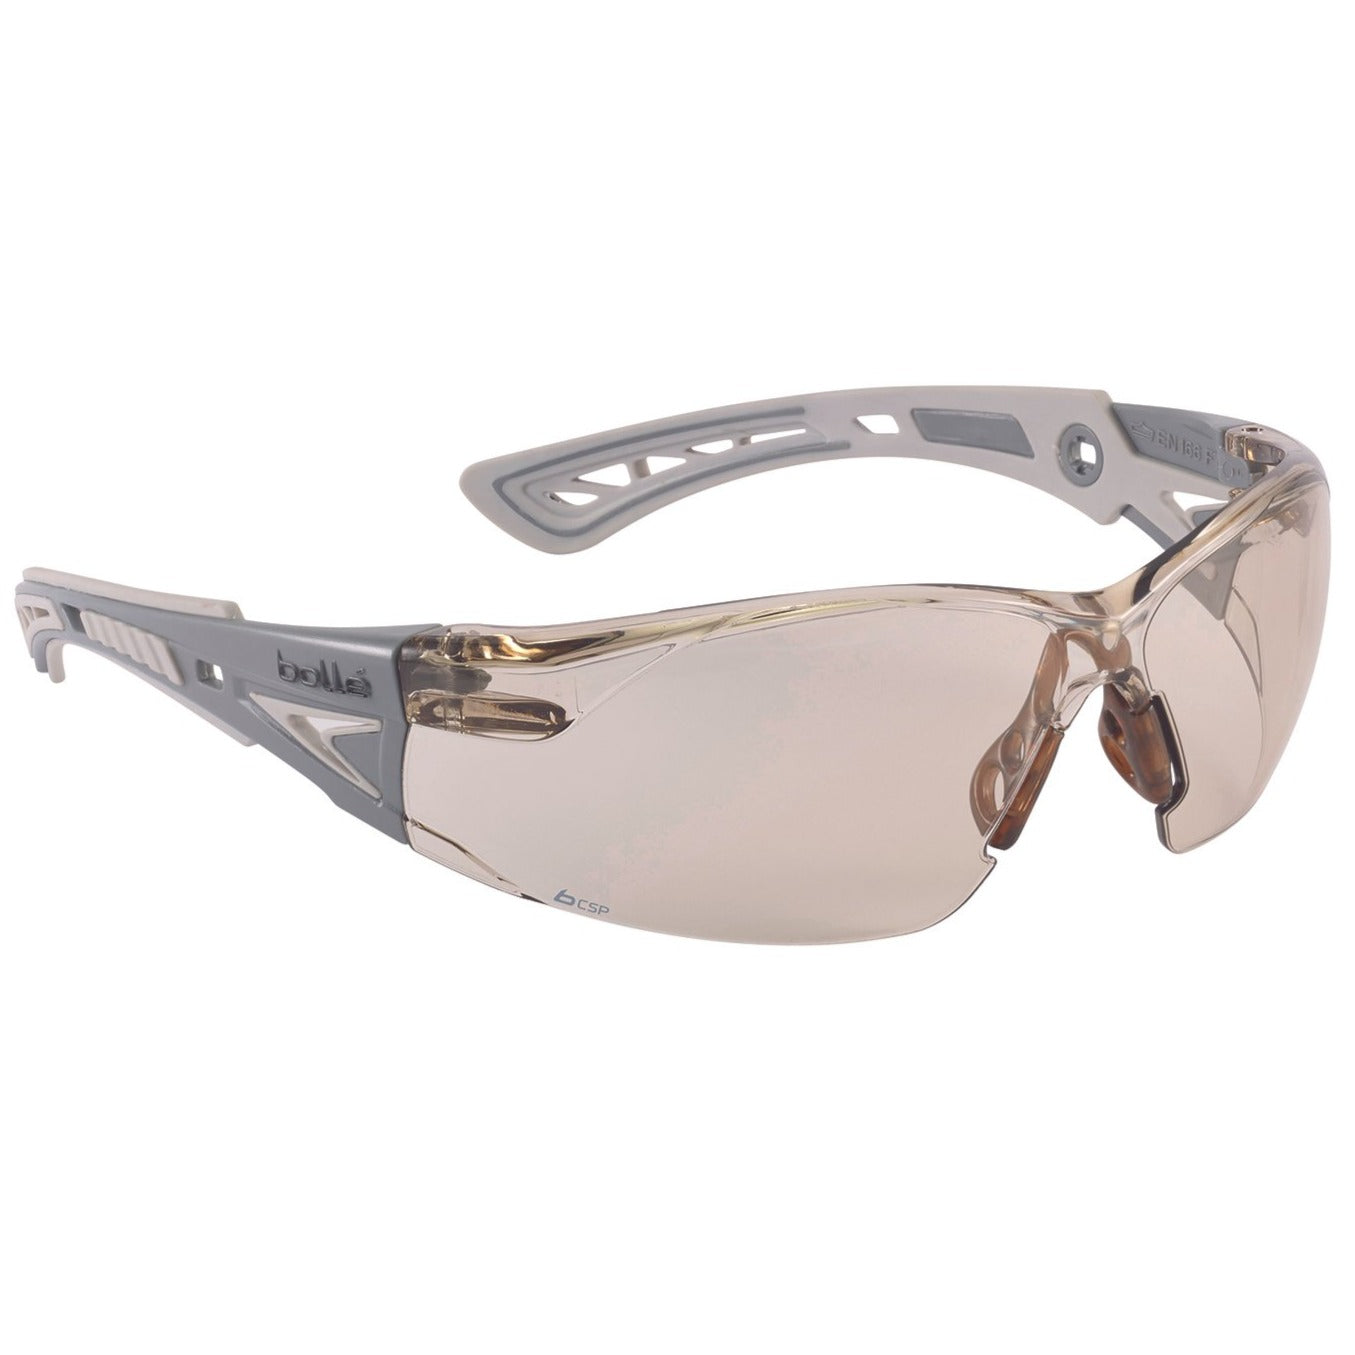 Bolle rush + csp lens safety glasses, bolle safety spectacles